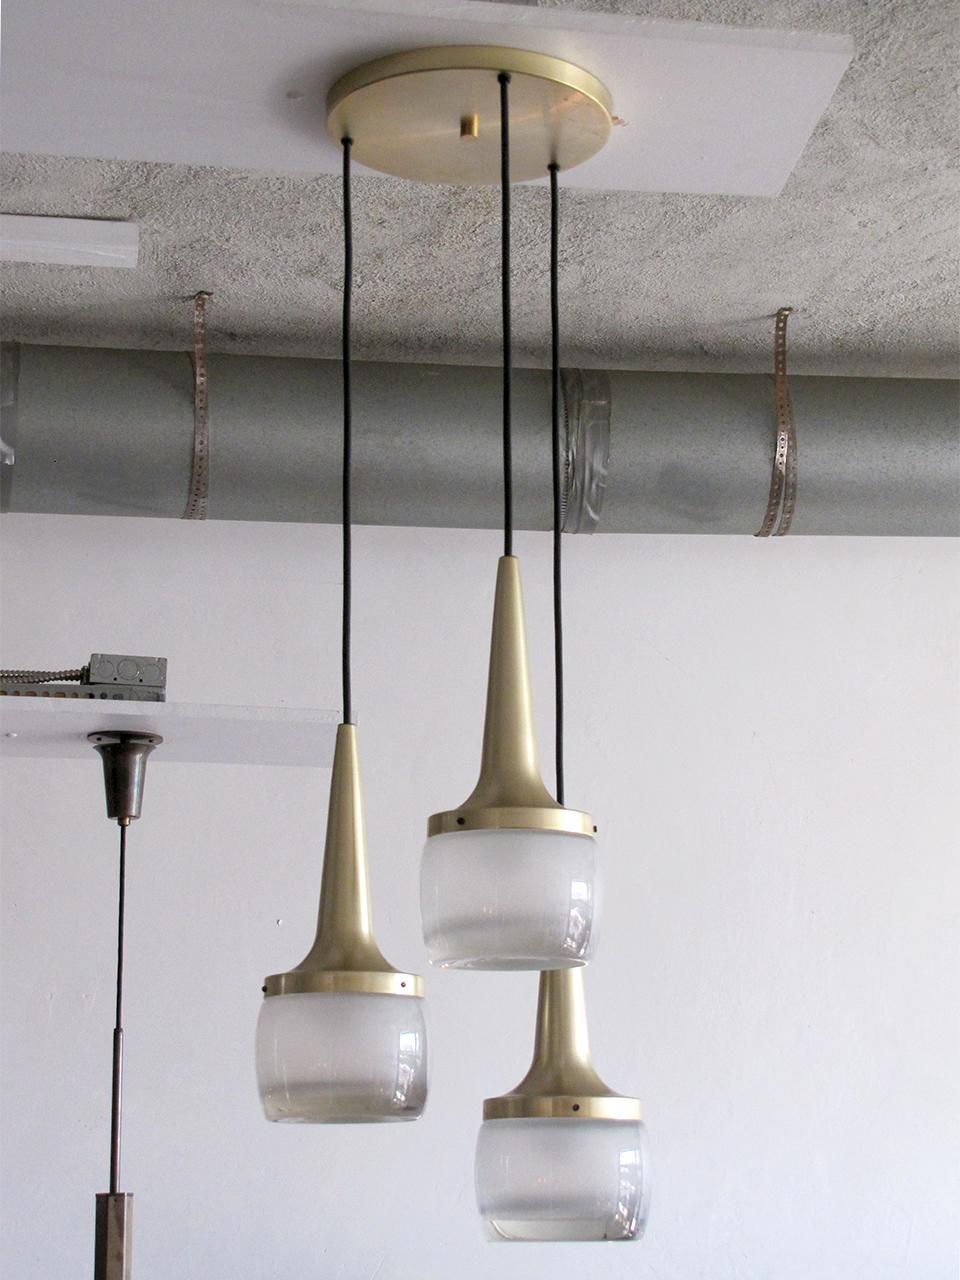 set of three pendant lights by Staff, brushed brass and heavy molded glass, wired for US standards, dimmable, three E27 sockets, max. wattage 60w per pendant or LED equivalent, bulbs provided as a onetime courtesy, Can be hung individually.